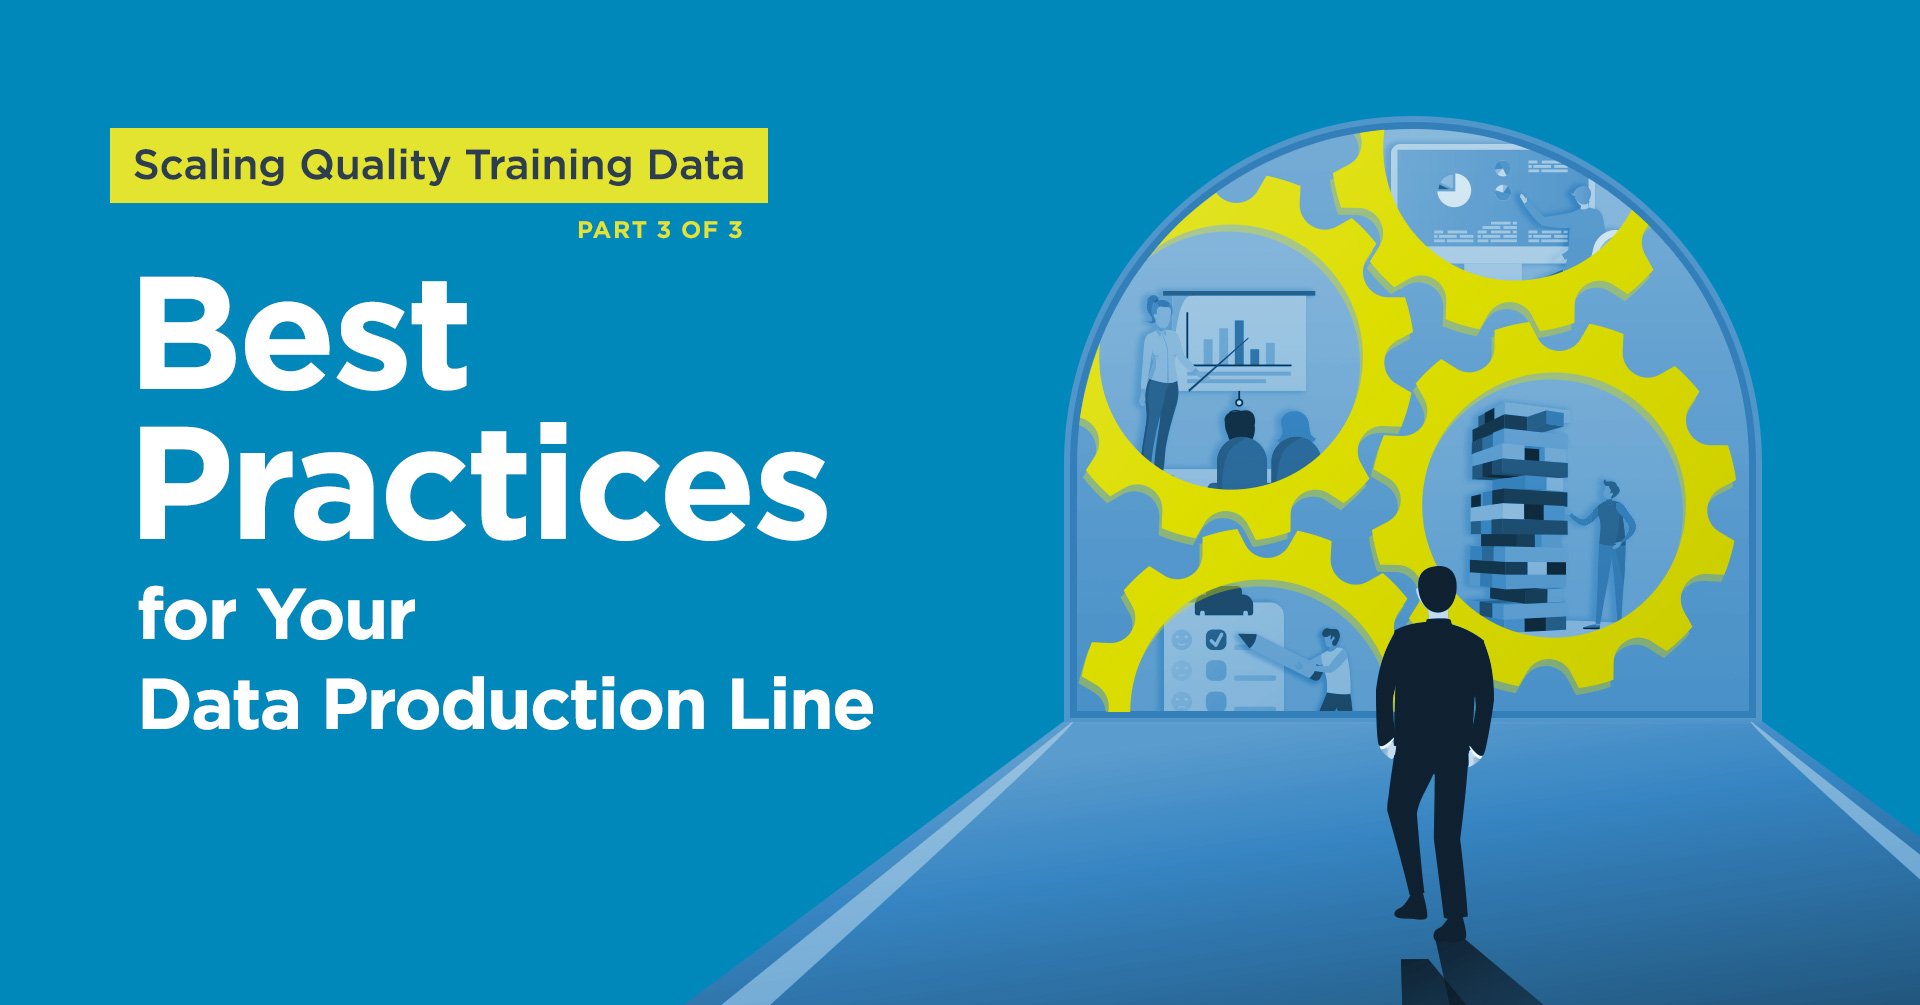 Scaling Quality Training Data: Best Practices for Your Data Production Line